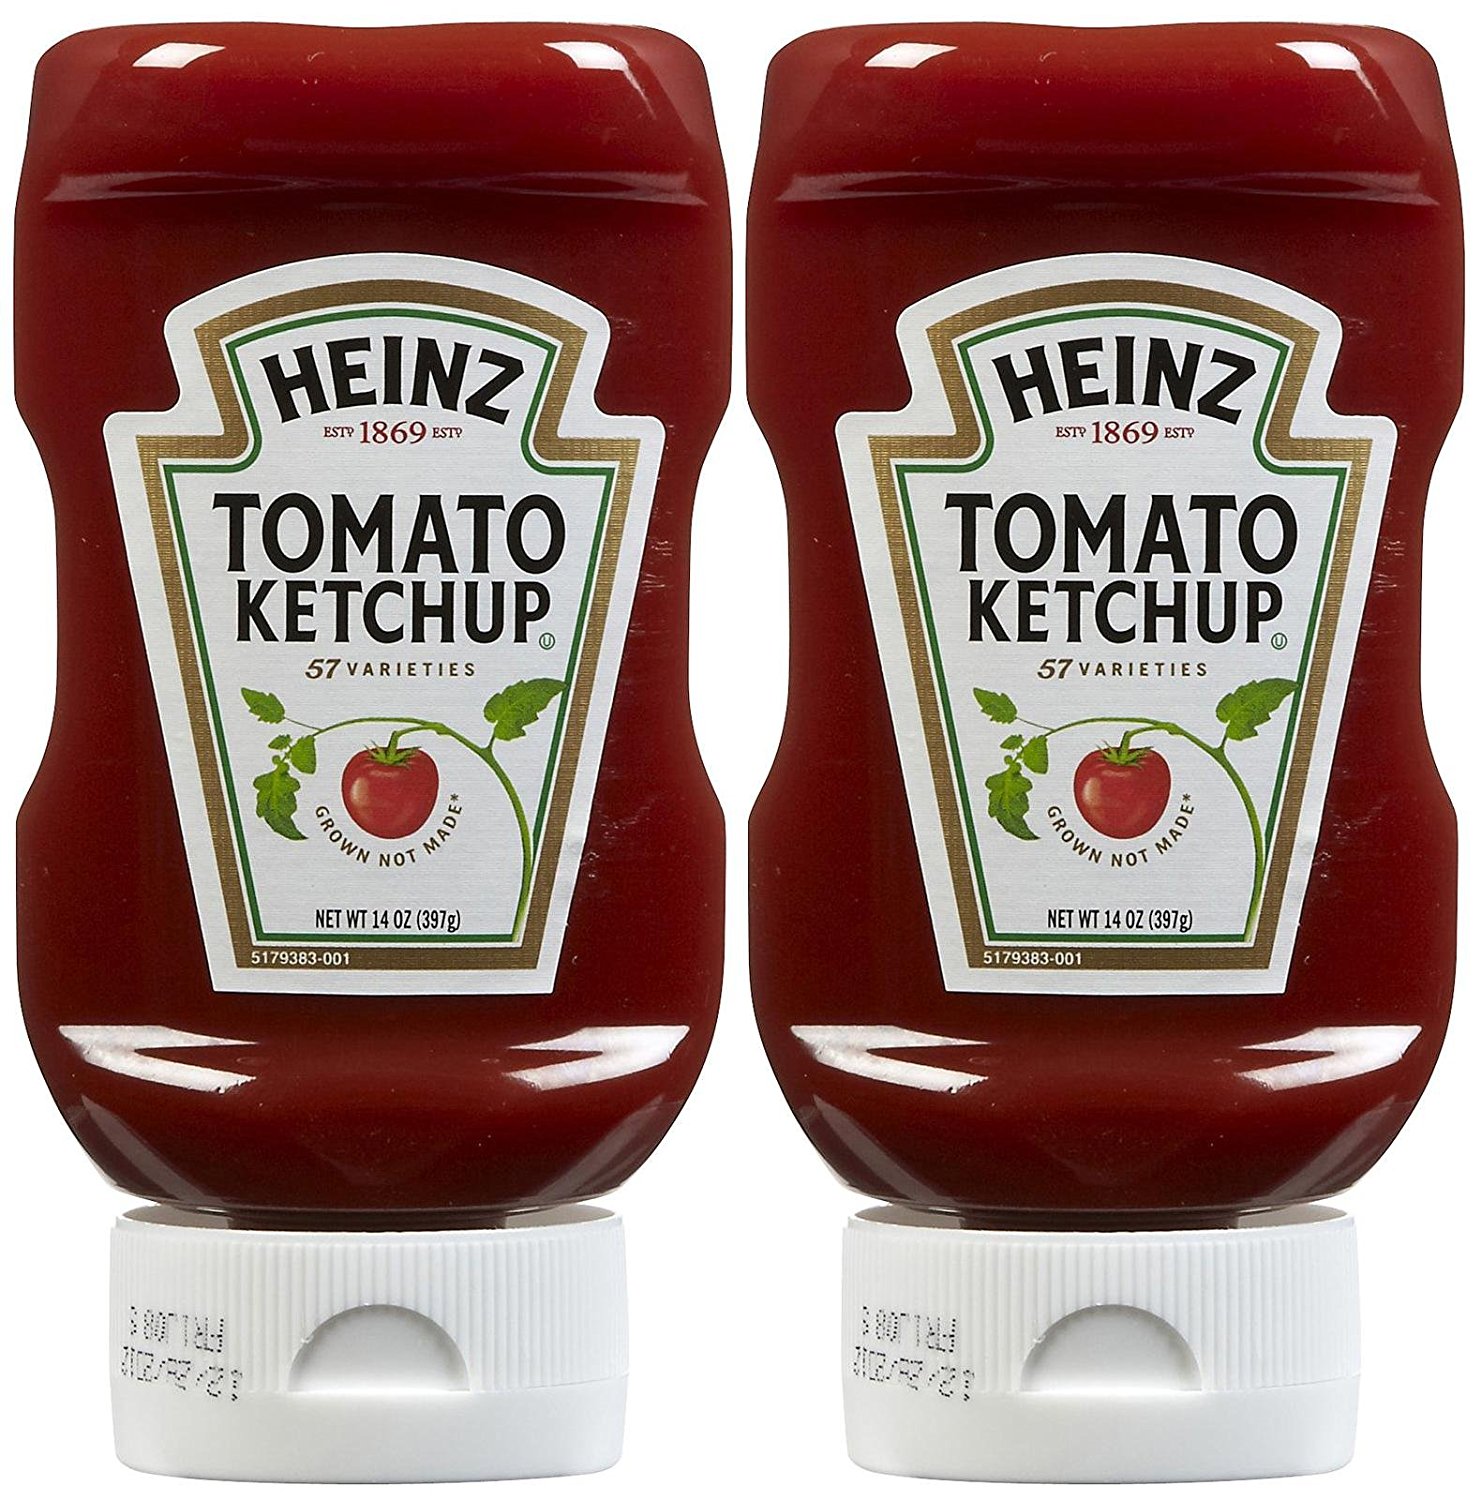 Amazon.com: Heinz, Tomato Ketchup, 14oz Squeeze Bottle (Pack of 2 ...